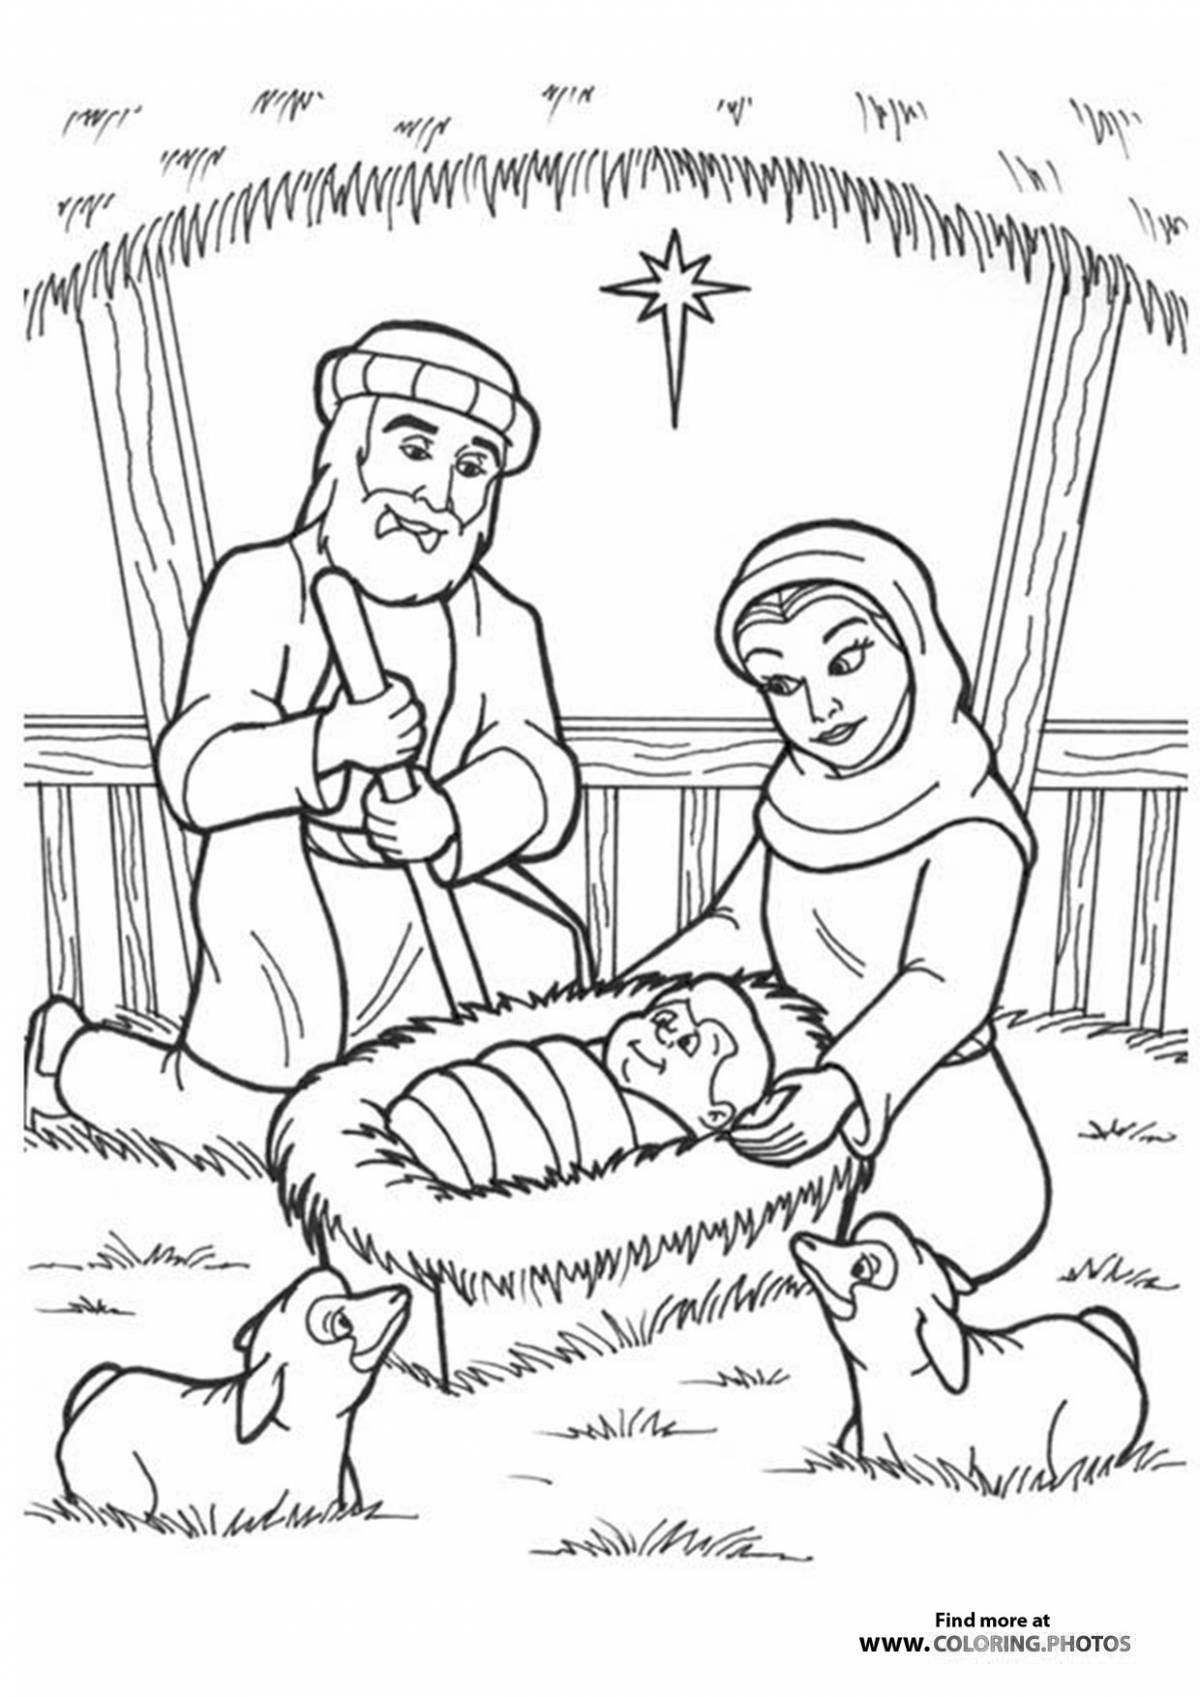 Coloring page divine birth of christ